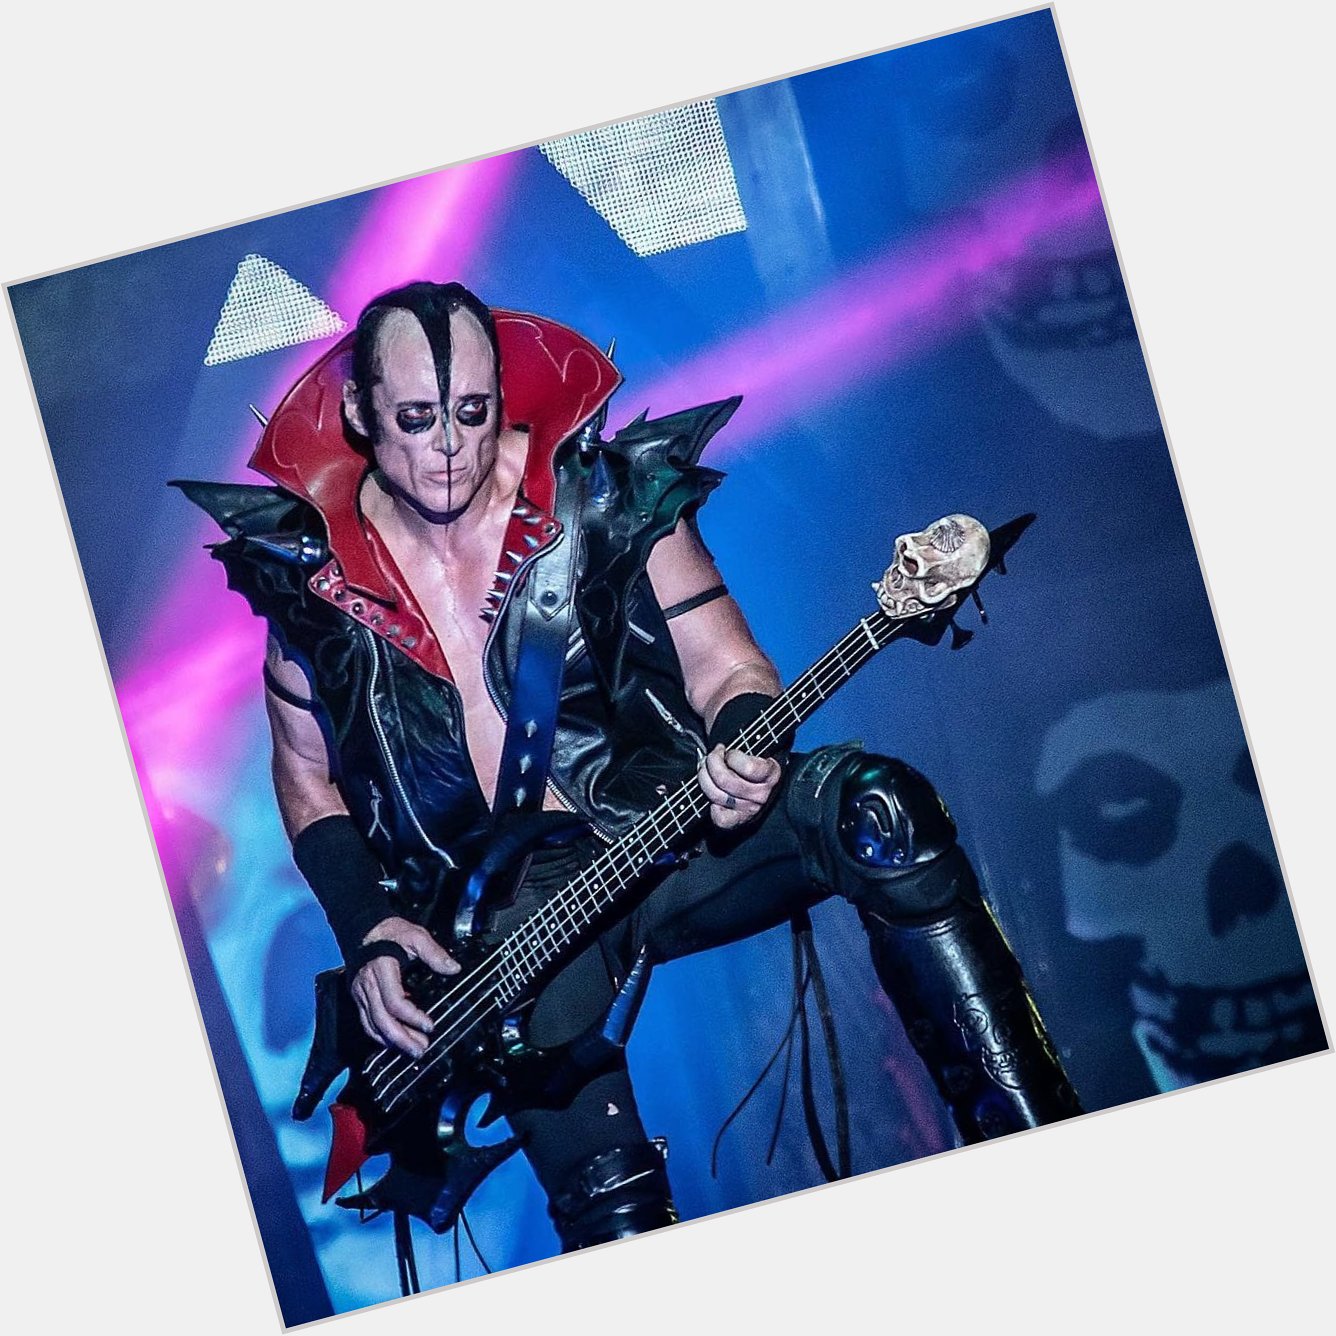 Happy Birthday to Jerry Only. Born in Lodi, NJ on this day in 1959.   